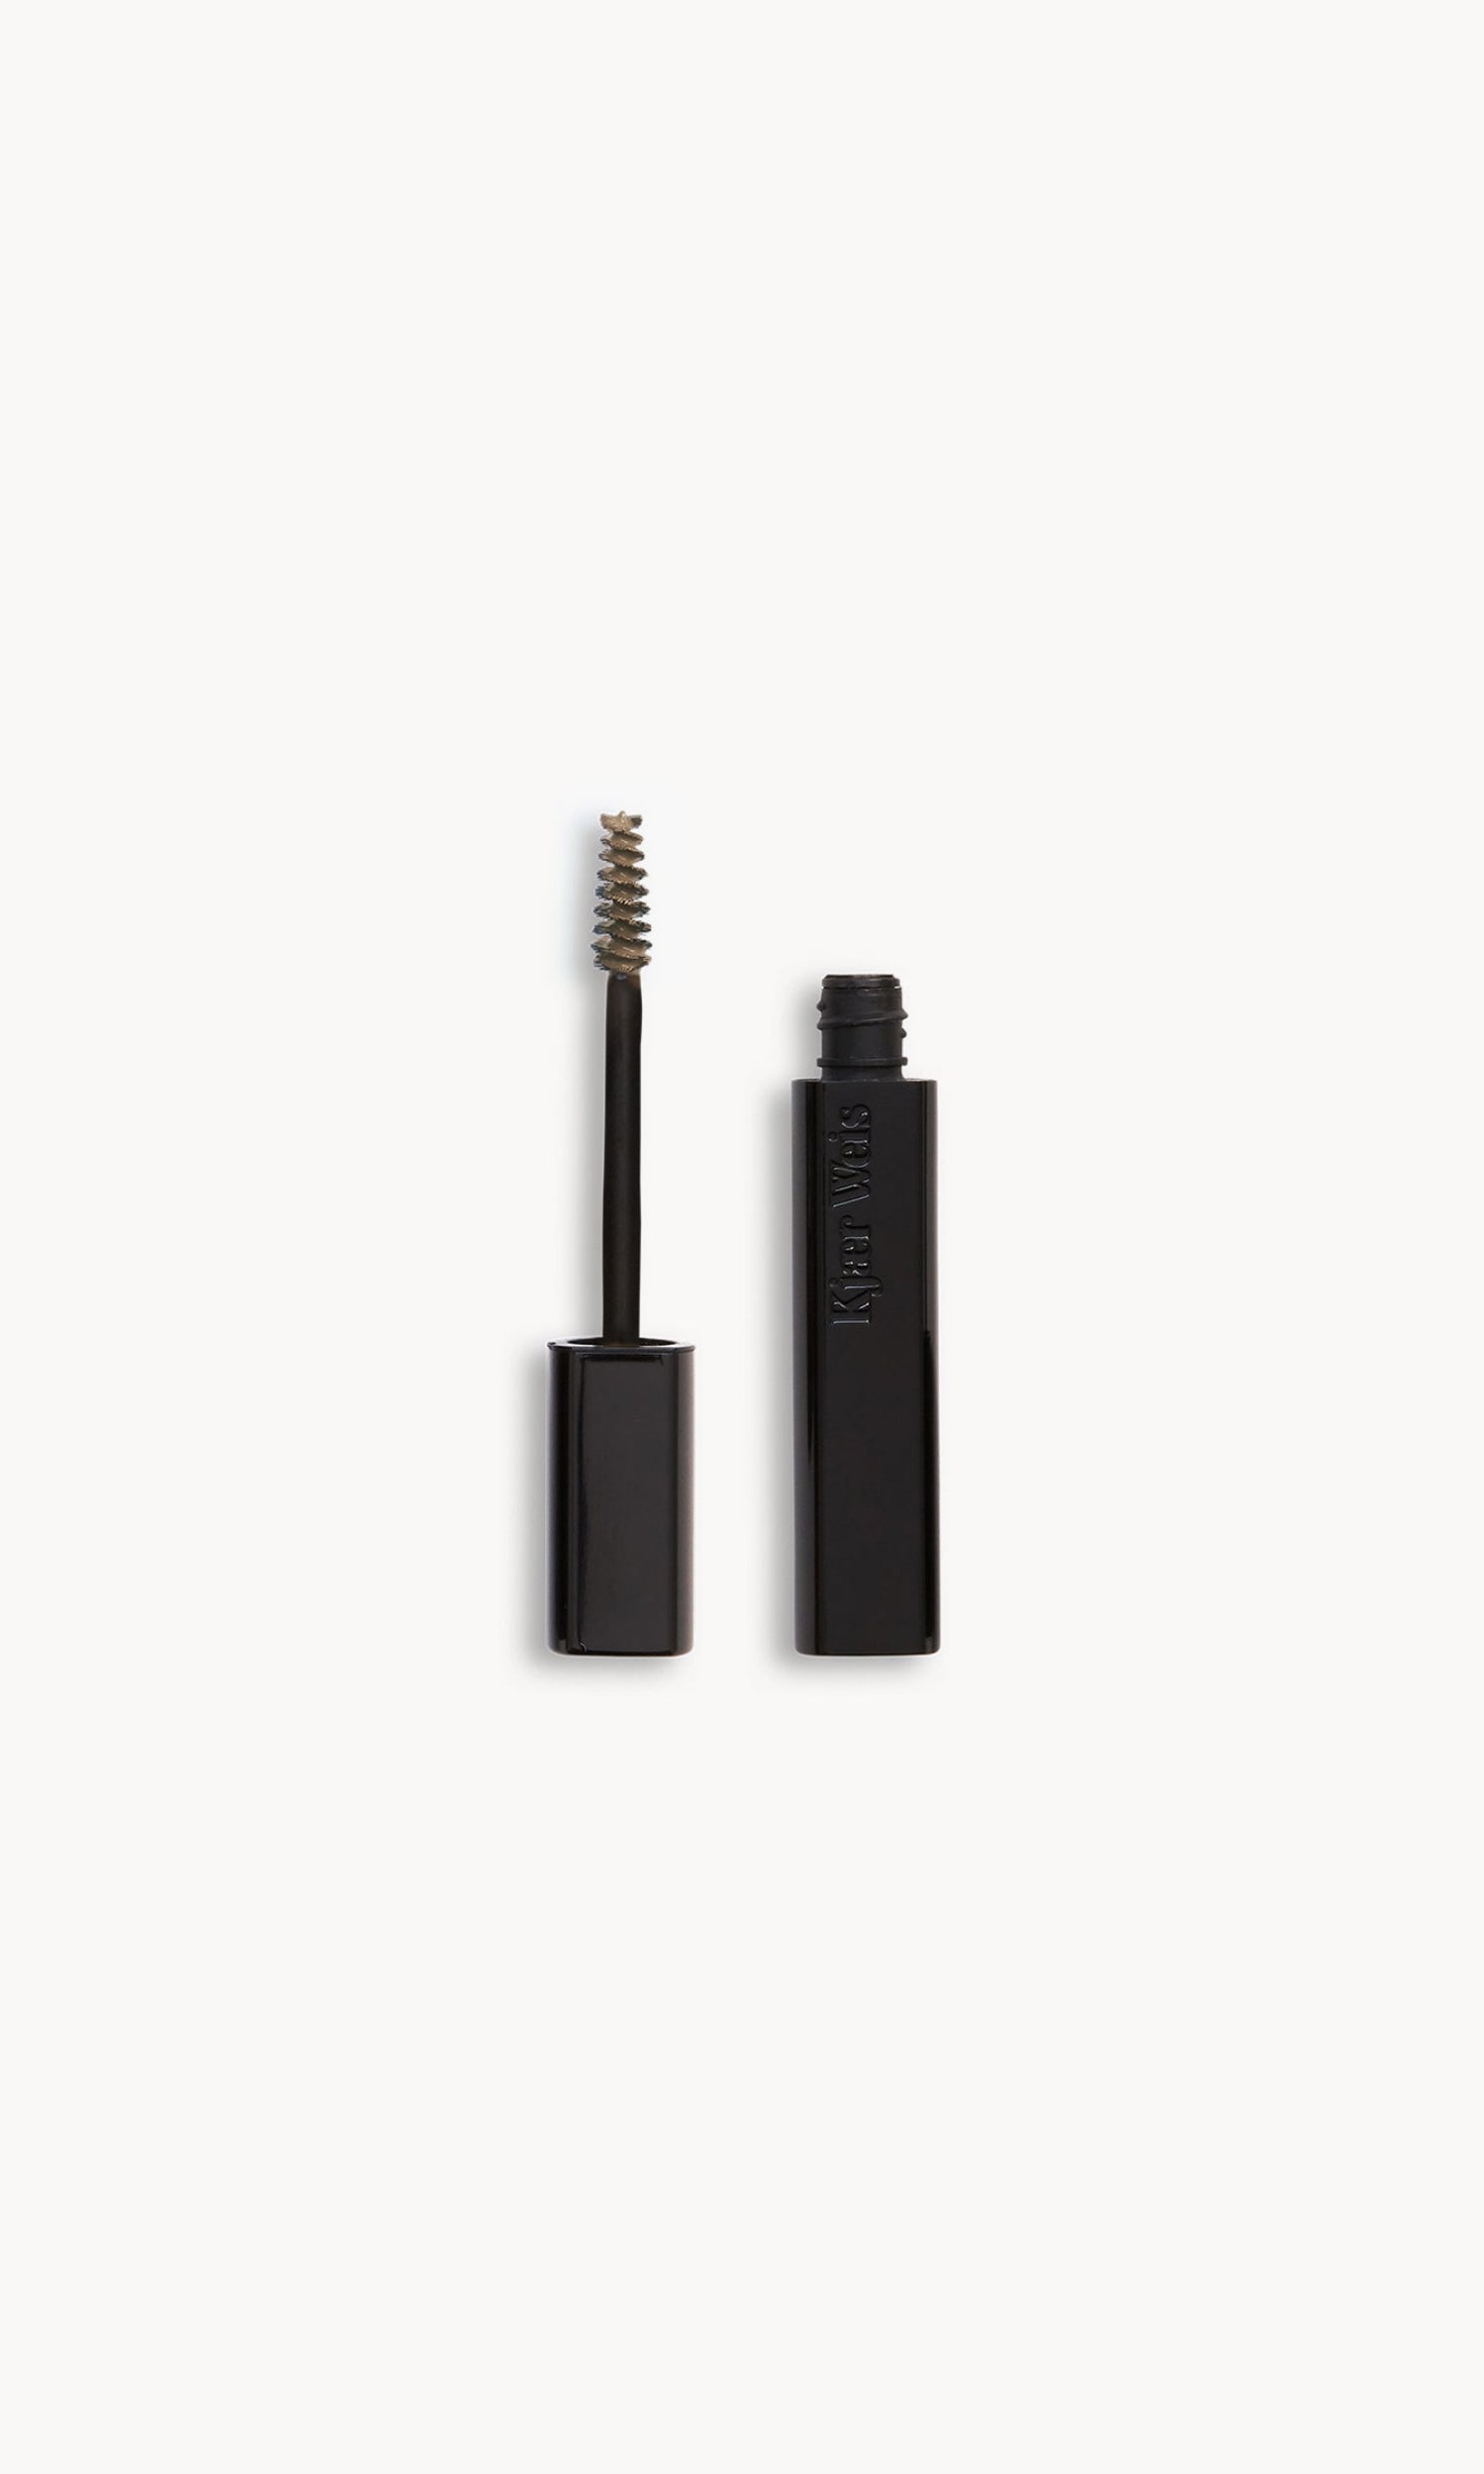 kjaer weis brow gel wand and bottle side by side, with blonde product on the wand